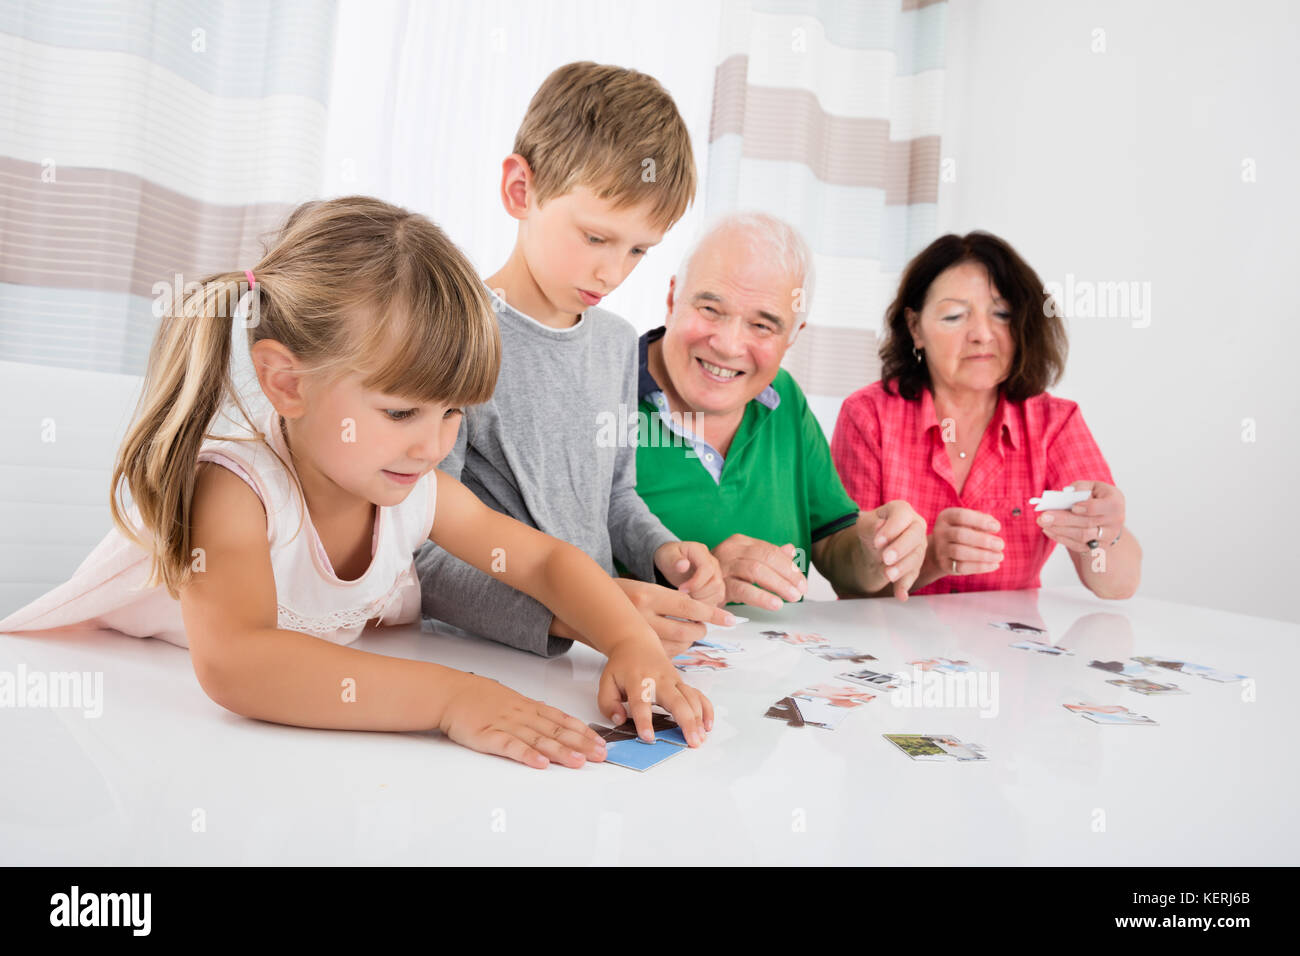 Grandparents Playing Together With Kids Holding Jigsaw Puzzle Pieces At Home Stock Photo